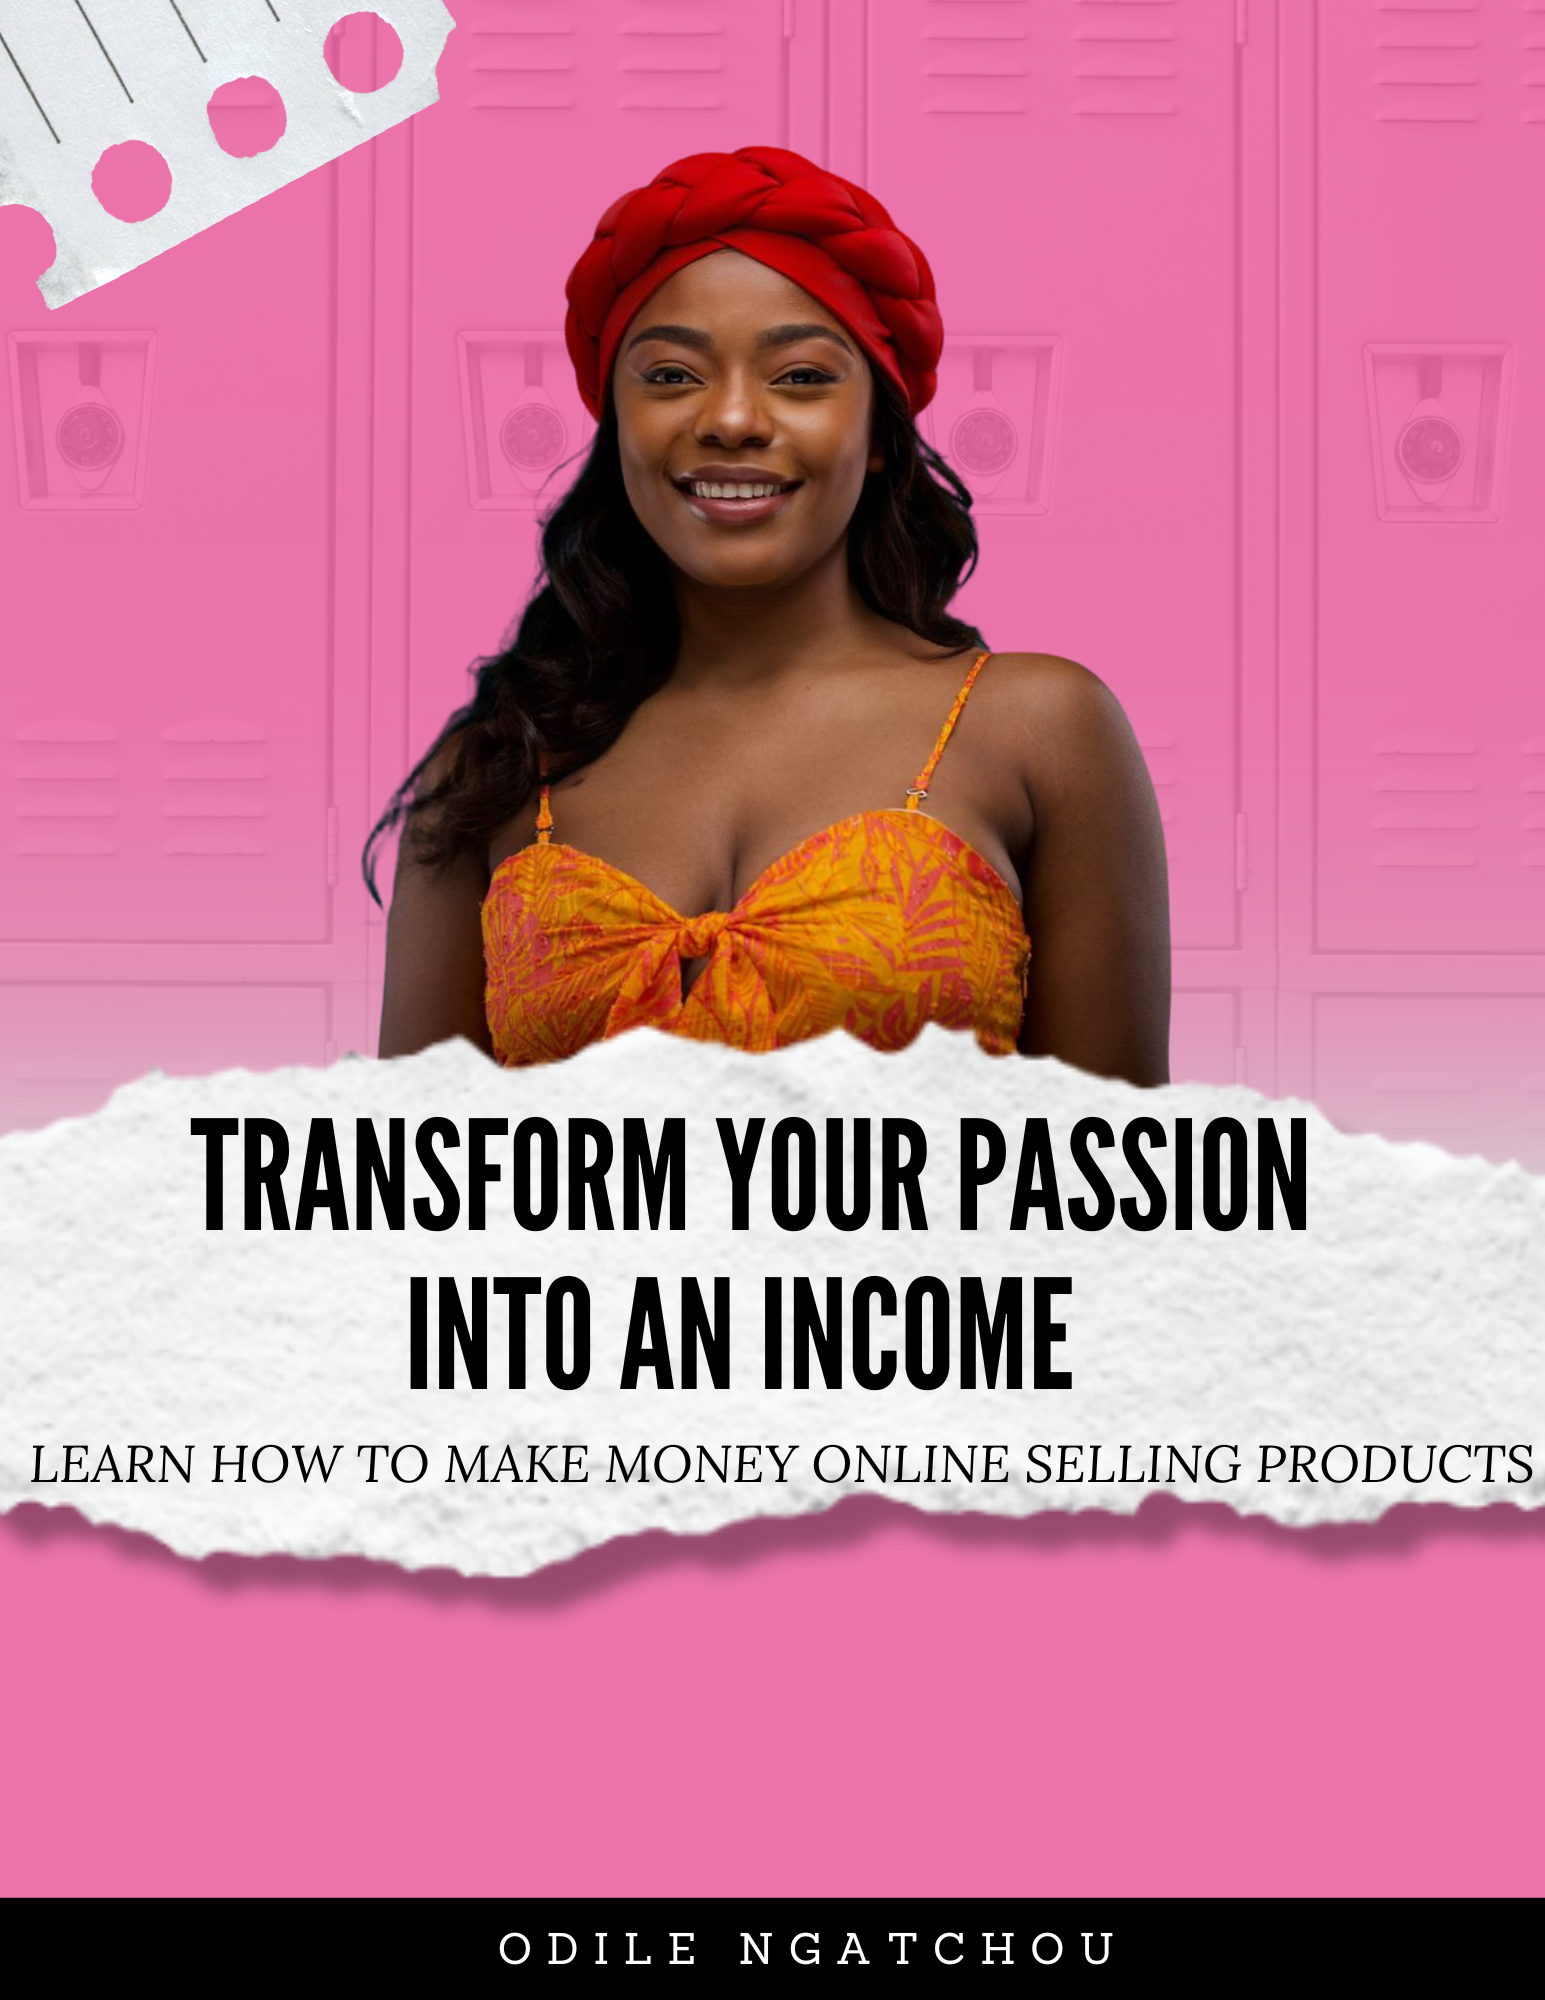 TRANSFORM YOU PASSION INTO AN INCOME